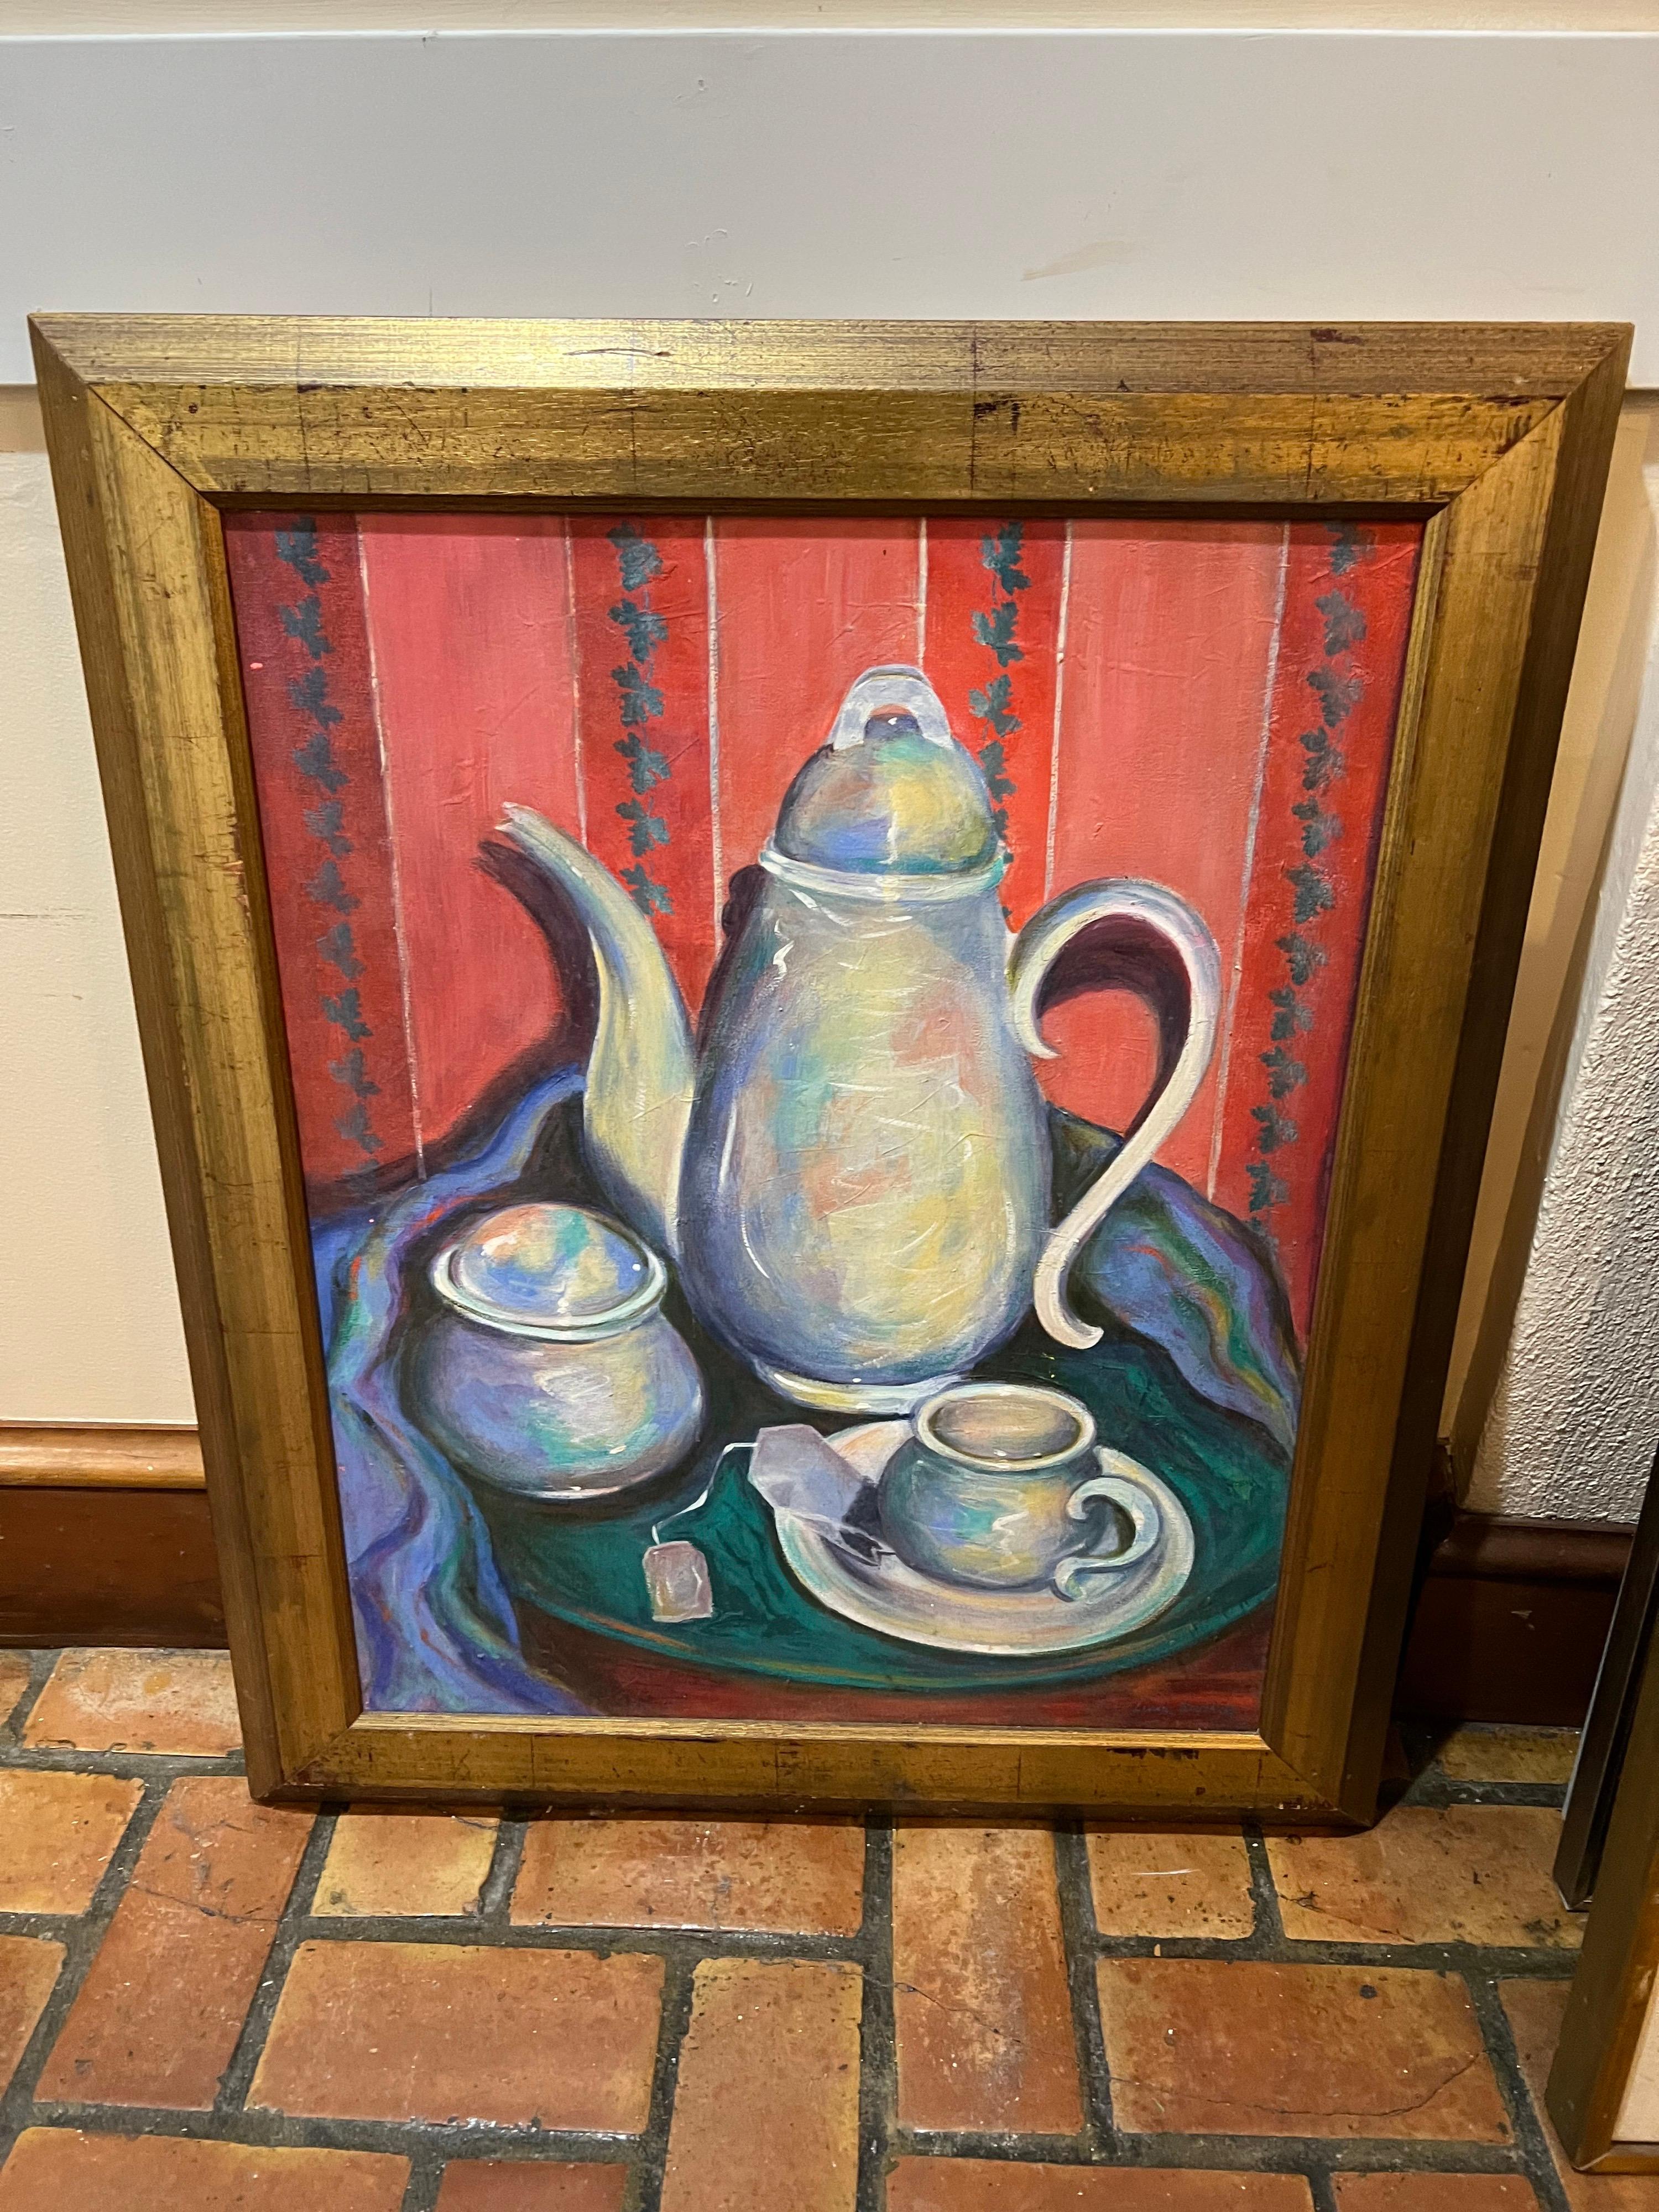 Signed teapot painting by Linda Smith. Whimsical, colorful painting of a teapot, sugar bowl and cup and saucer. Perfect decor for a tea room or coffee shop. Housed in a thick, solid wooden gilt frame.
This item can parcel ship for $45 in the